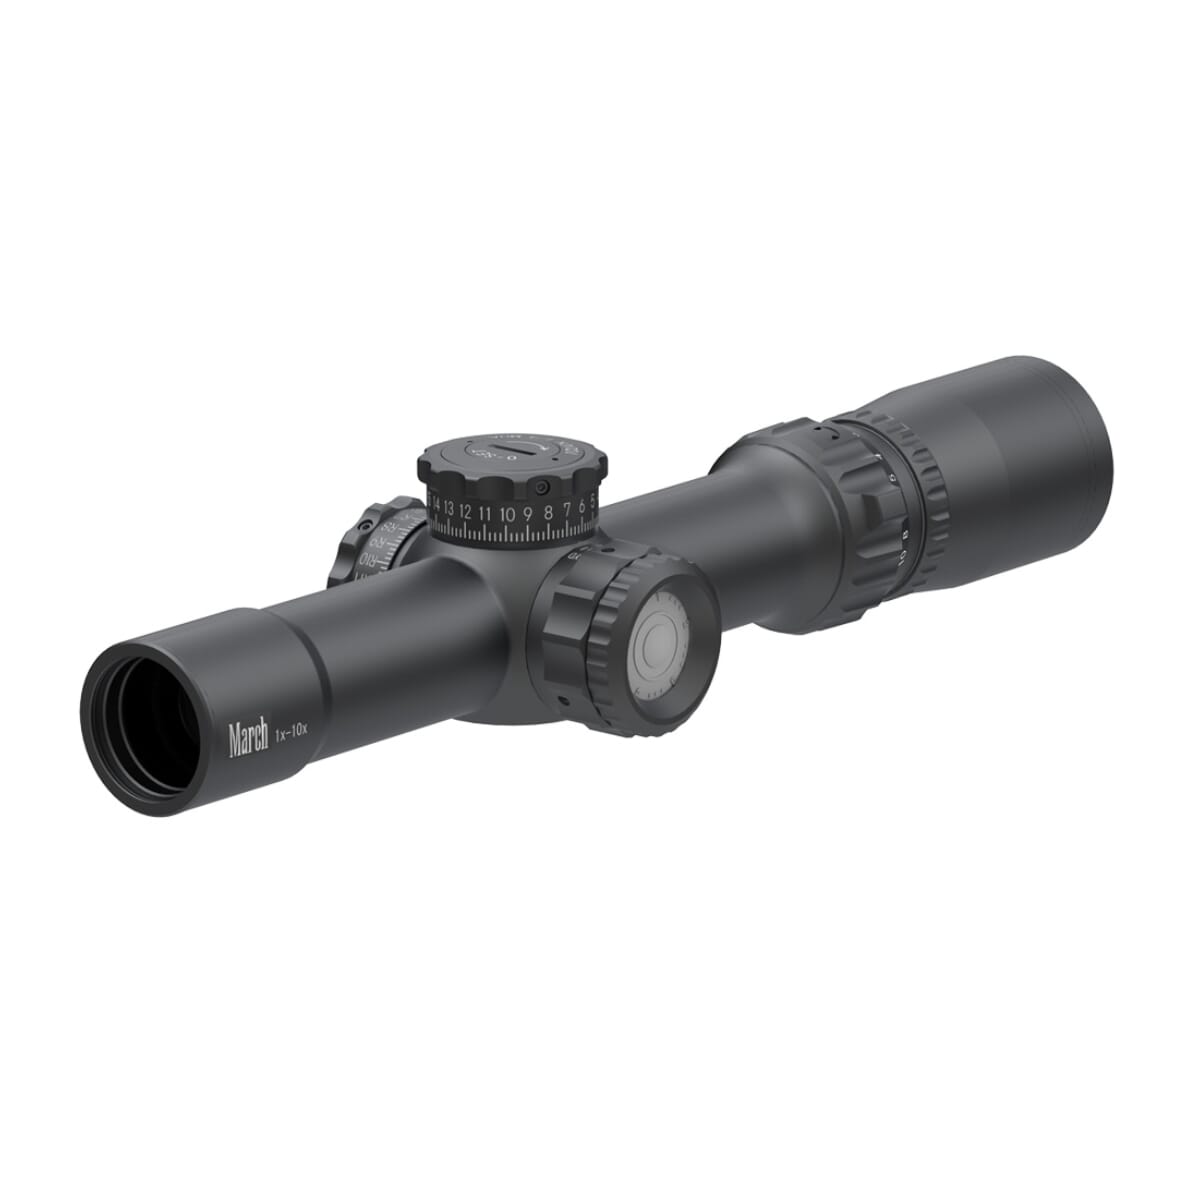 March Compact Tactical 1-10x24mm MTR-3 Reticle 1/4MOA Illuminated Riflescope D10V24TI-MTR-3-800011